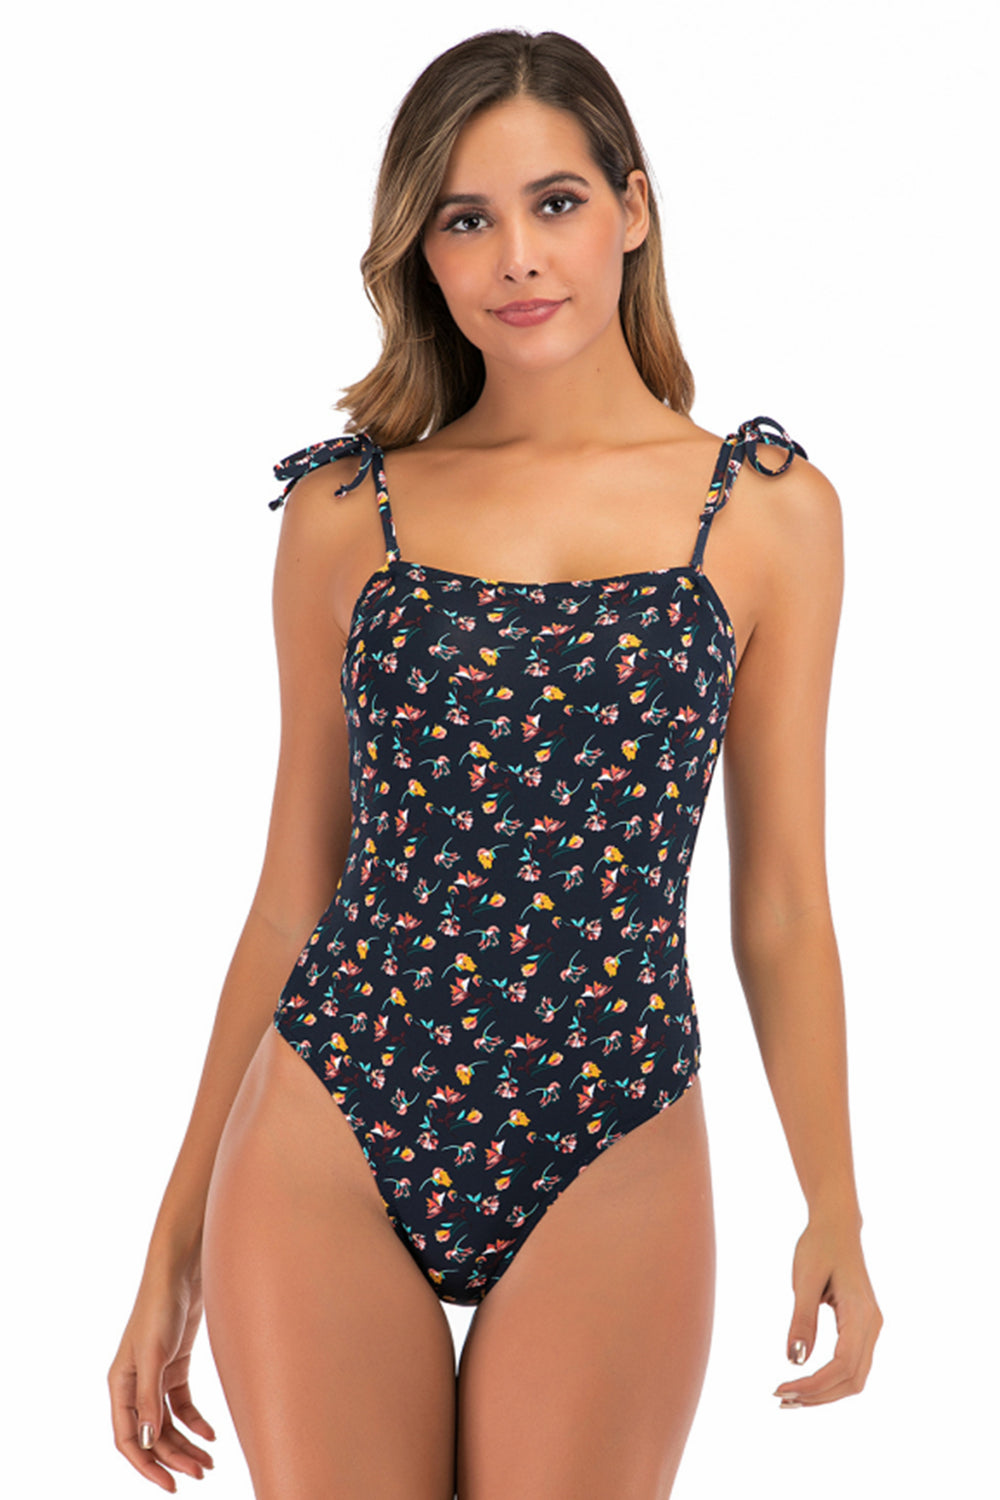 Iyasson Women Floral Print Backless Sling Swimsuit